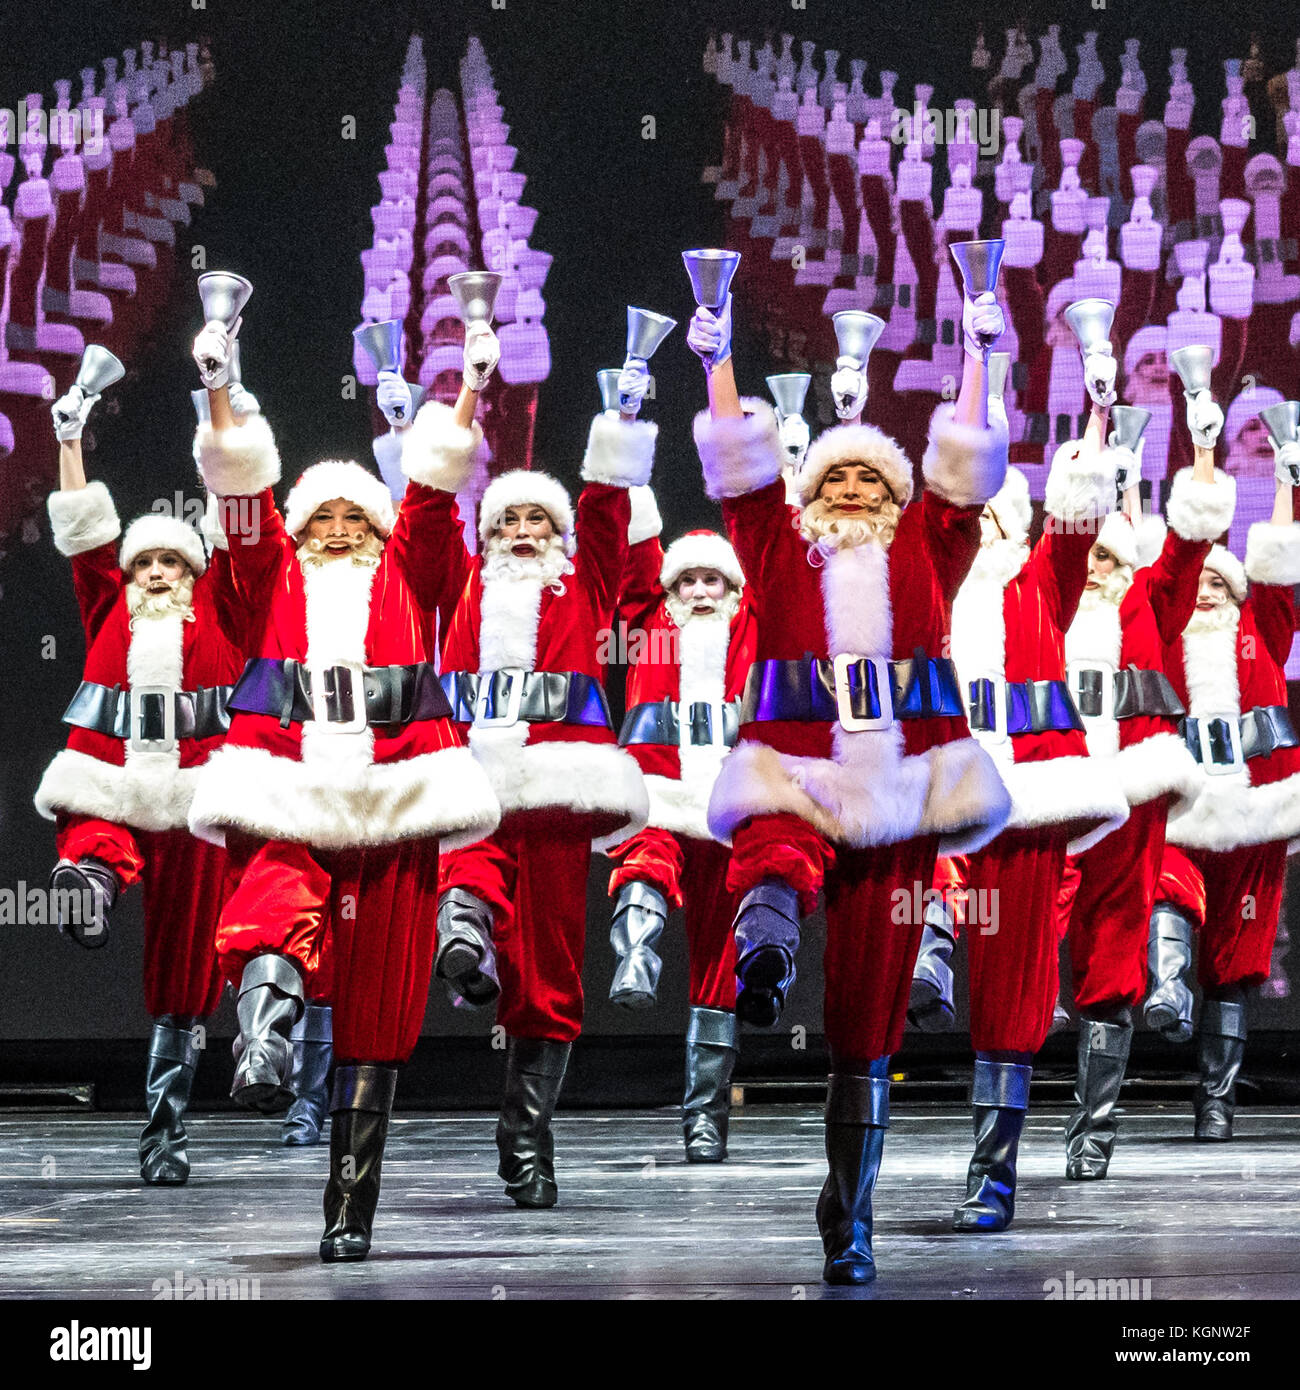 New York, USA, 10 Nov 2017. Radio City Rockettes in Santa Claus costumes  dance during the opening day of the 2017 Christmas Spectacular show at New  York's Radio City Music Hall. The